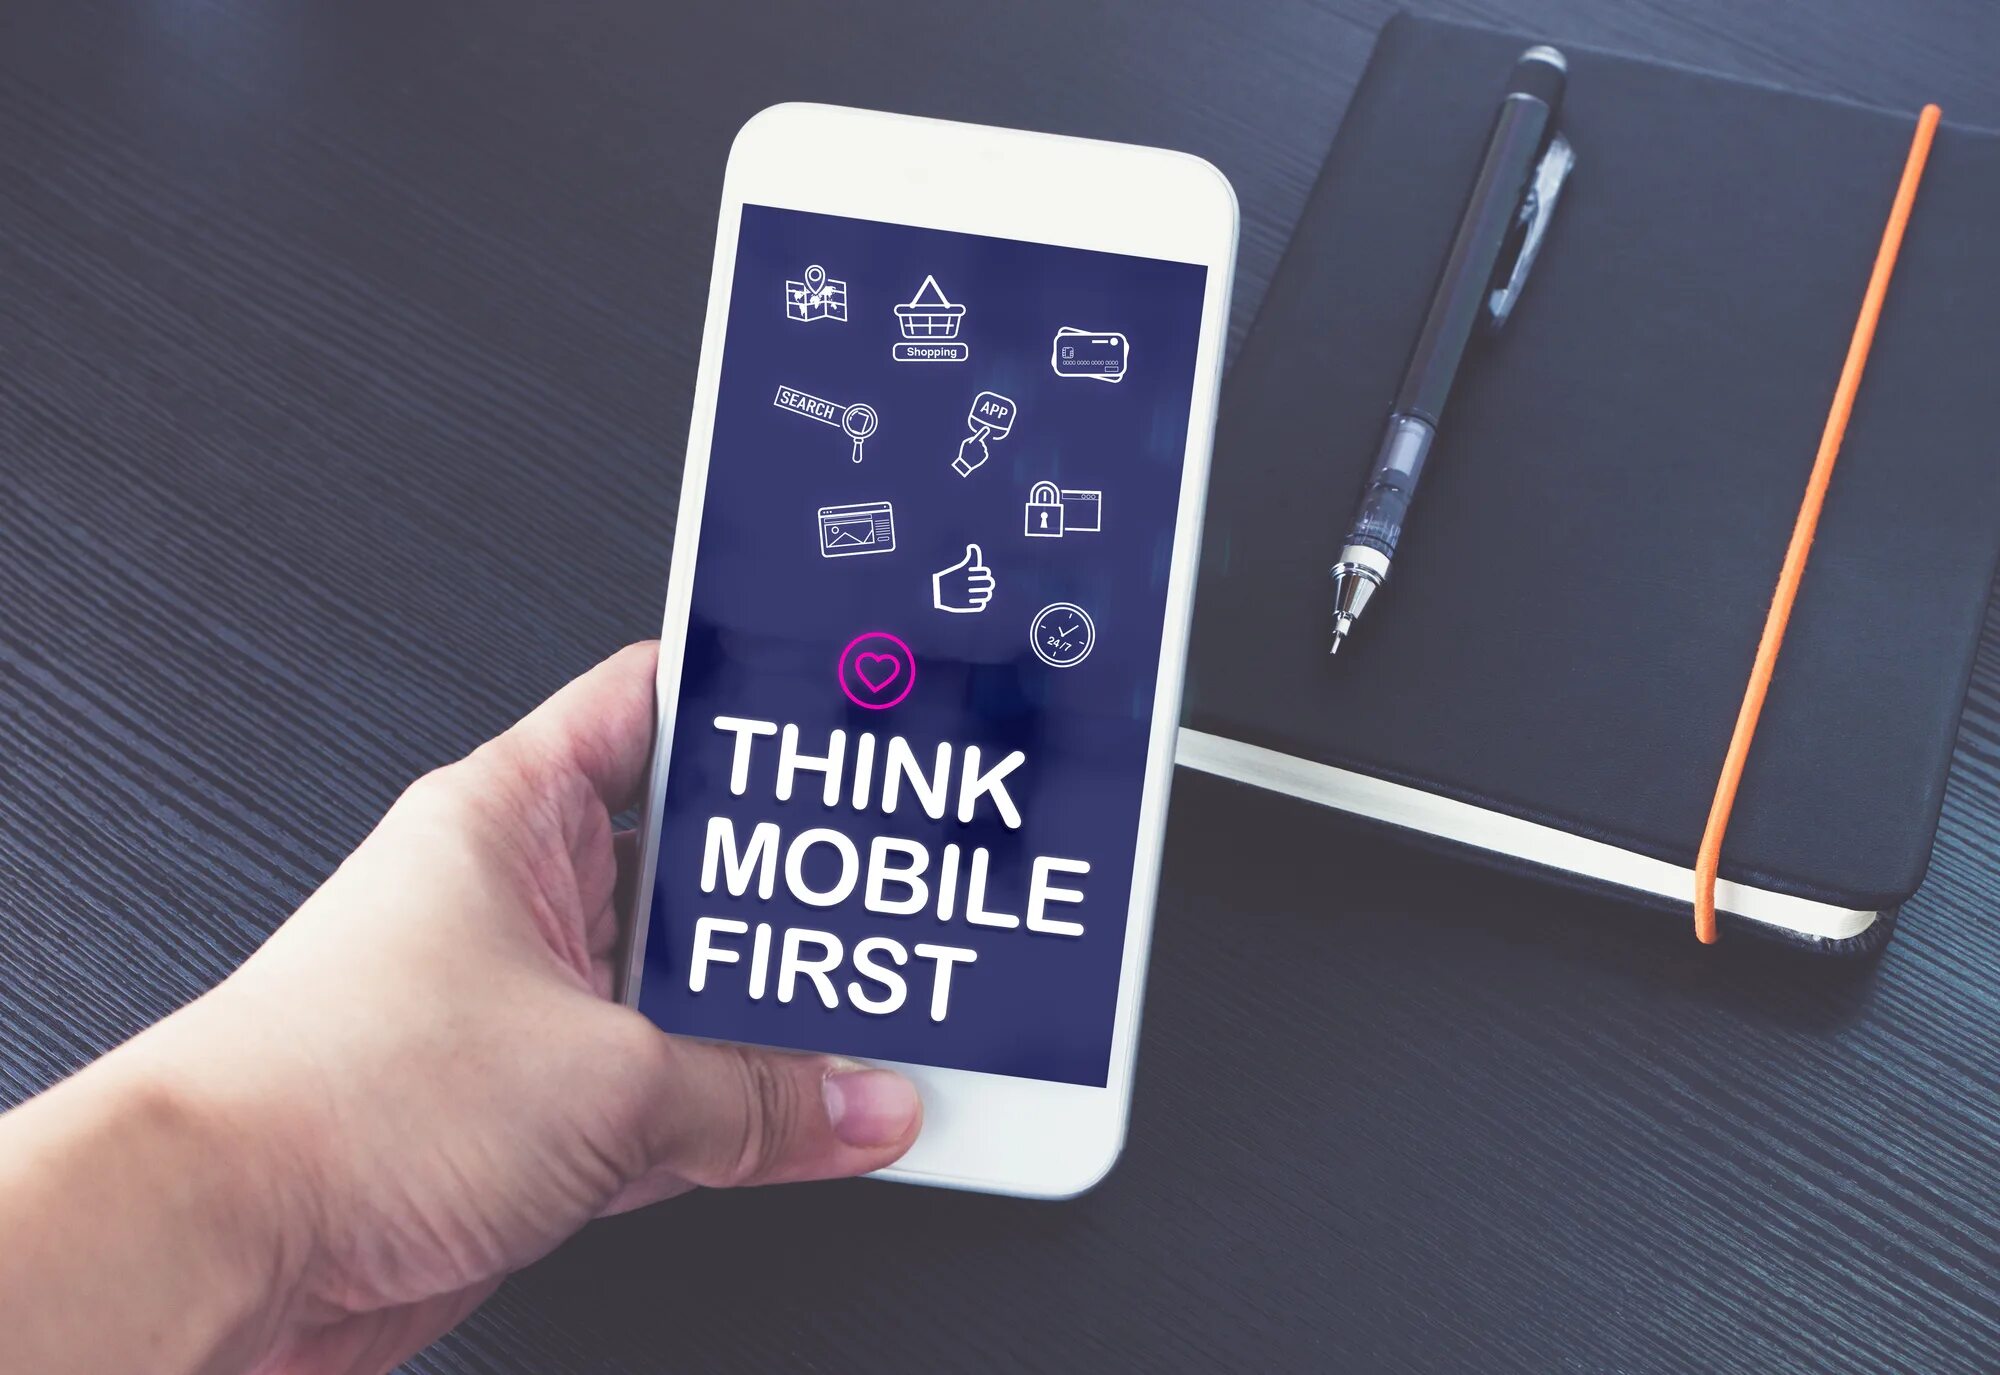 Mobile first. Think mobile. Mobile first дизайн примеры. Мобайл Ферст книга. Phone thinking 1